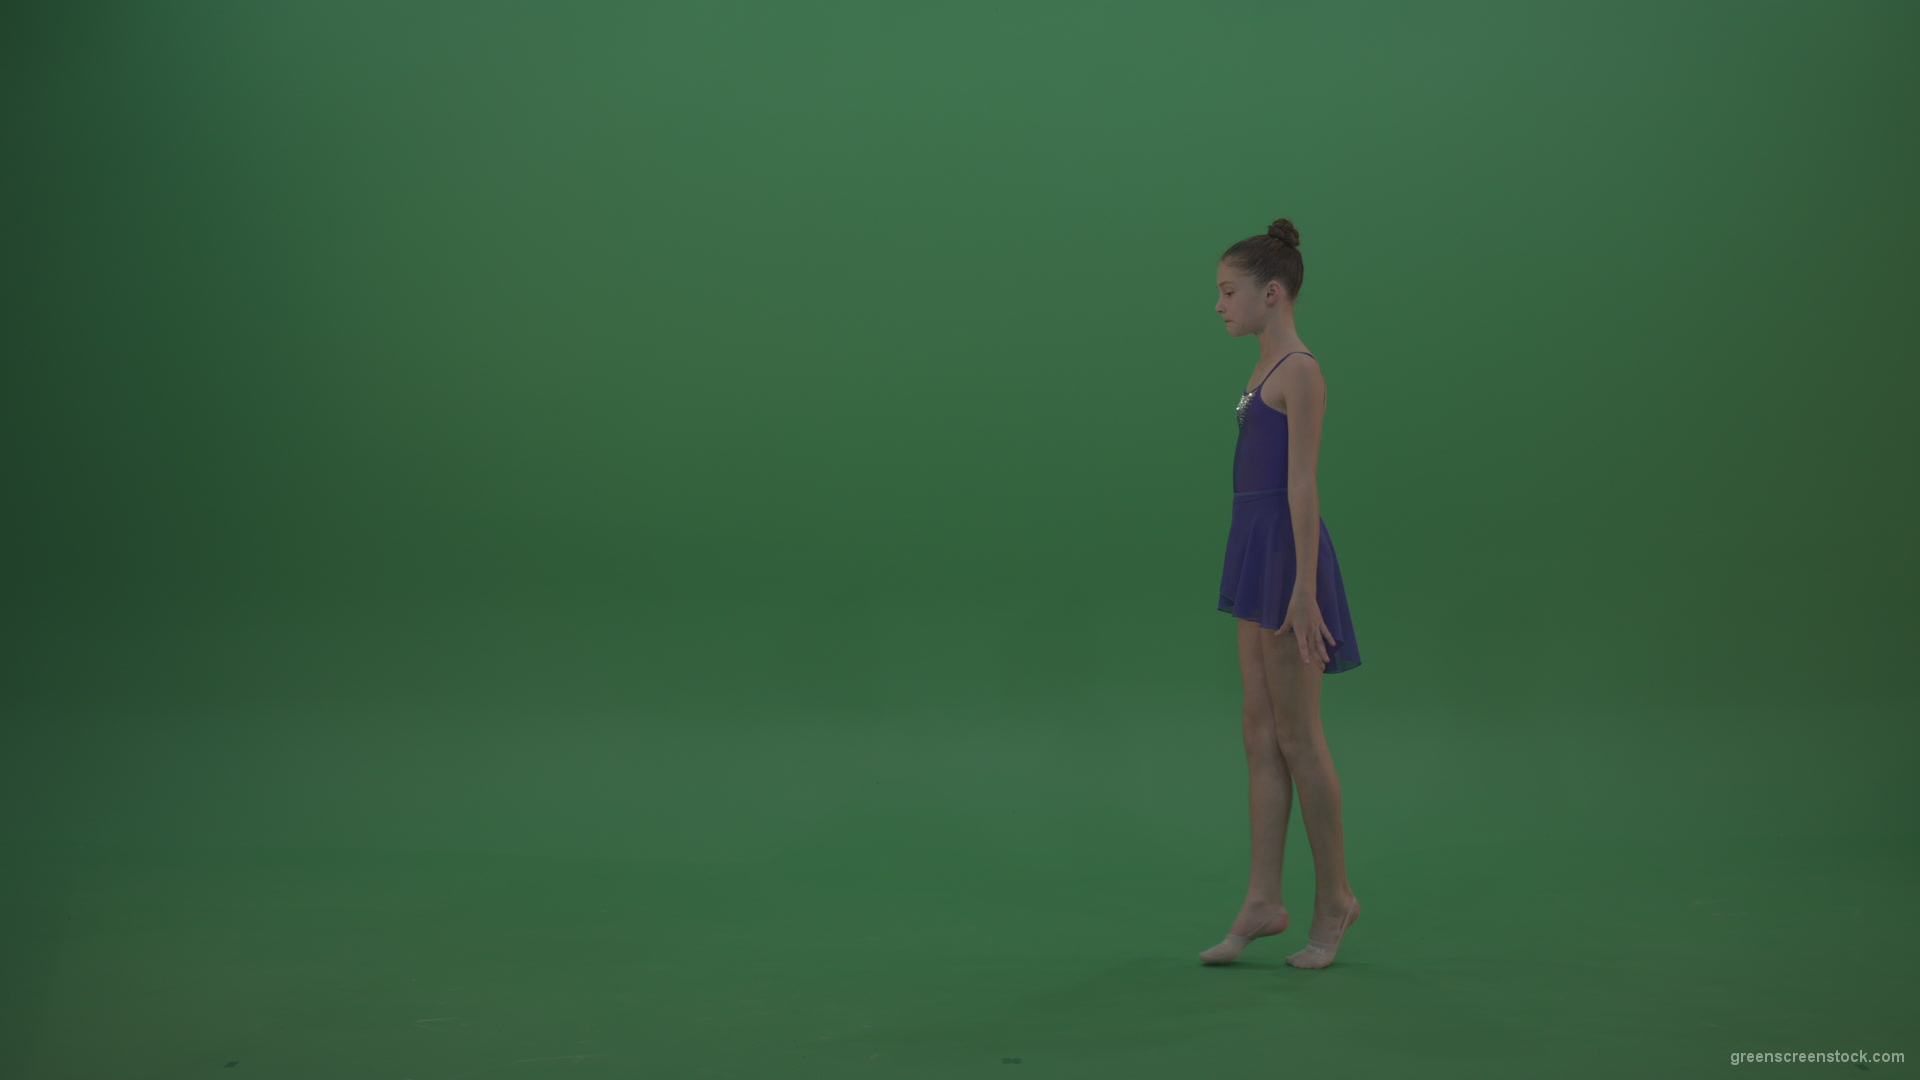 Cute_Athletic_Gymnast_Performing_Awesome_Split_Technique_Spin_Combination_With_Back_Handspring_On_Green_Screen_Chroma_Key_Wall_Background_002 Green Screen Stock